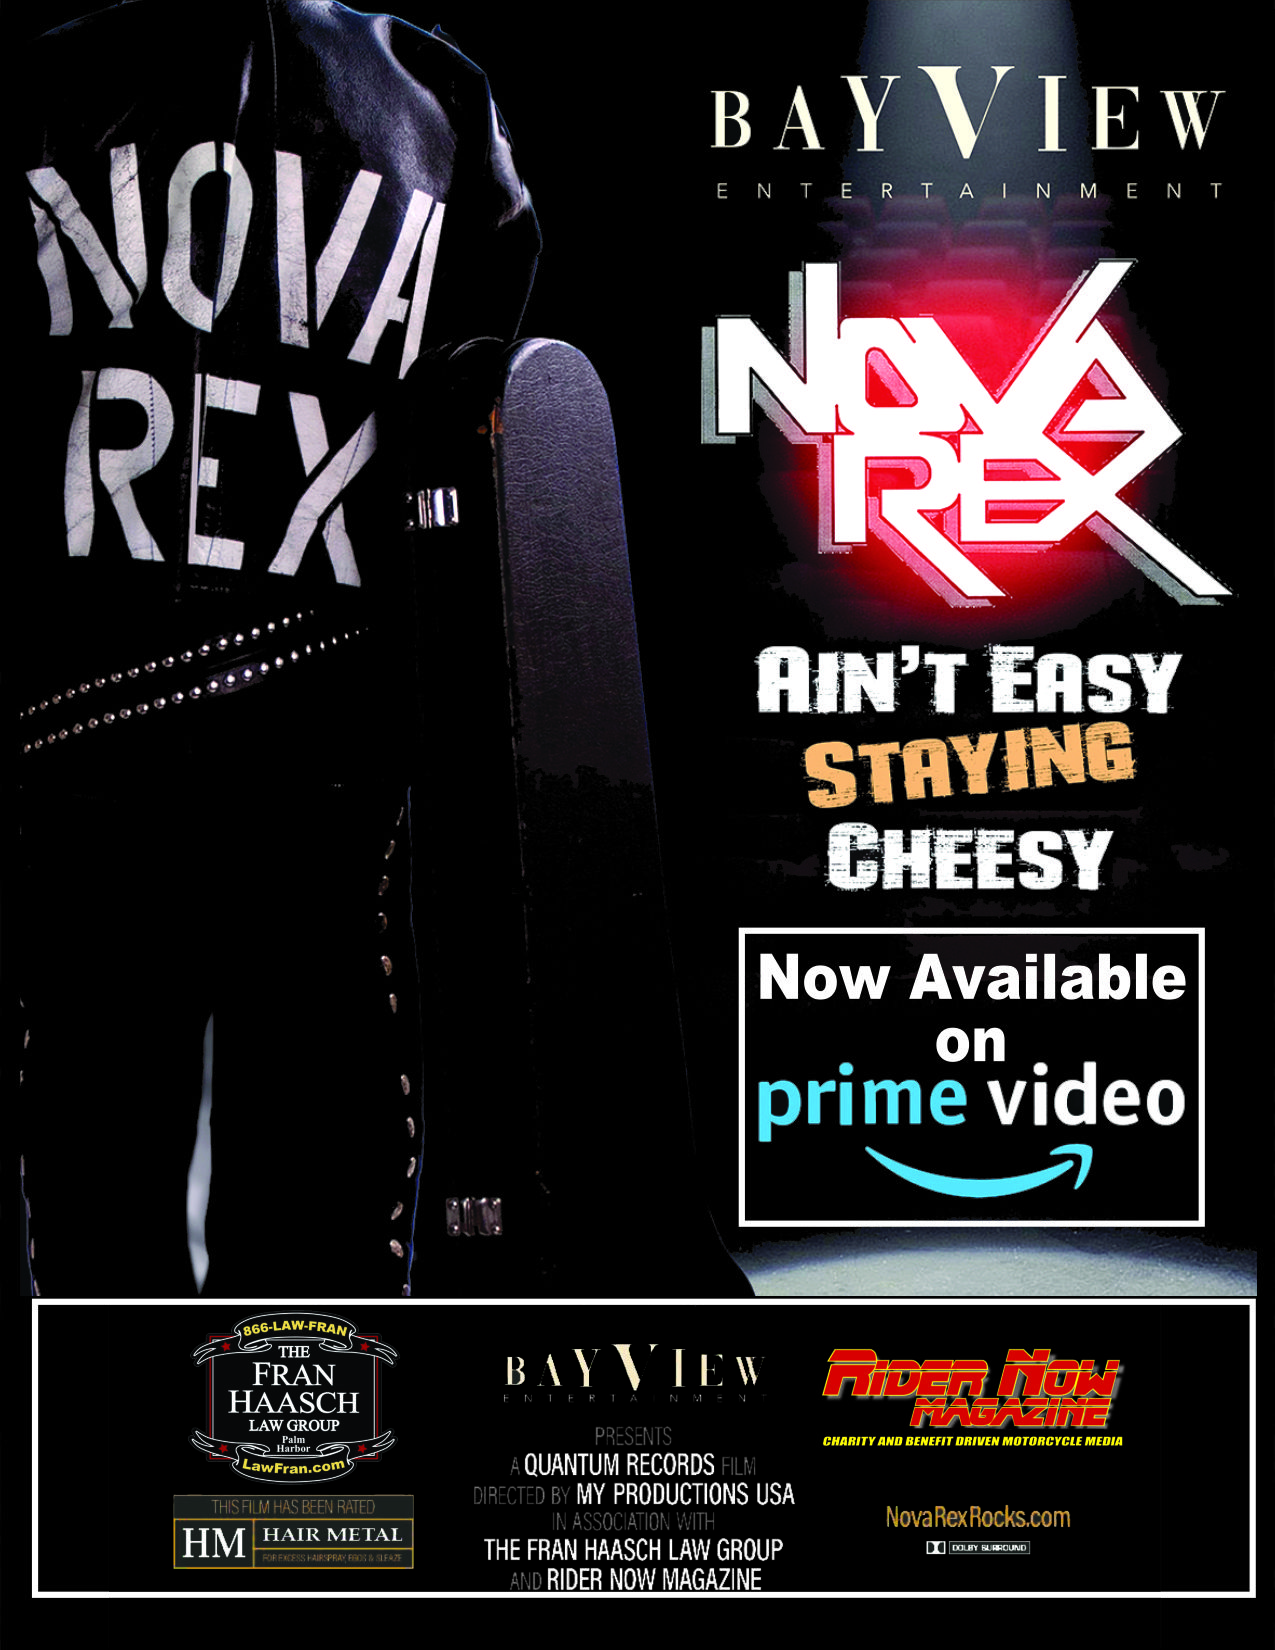 Nove Rex Ain't Easy Staying Cheesy on PRIME Video